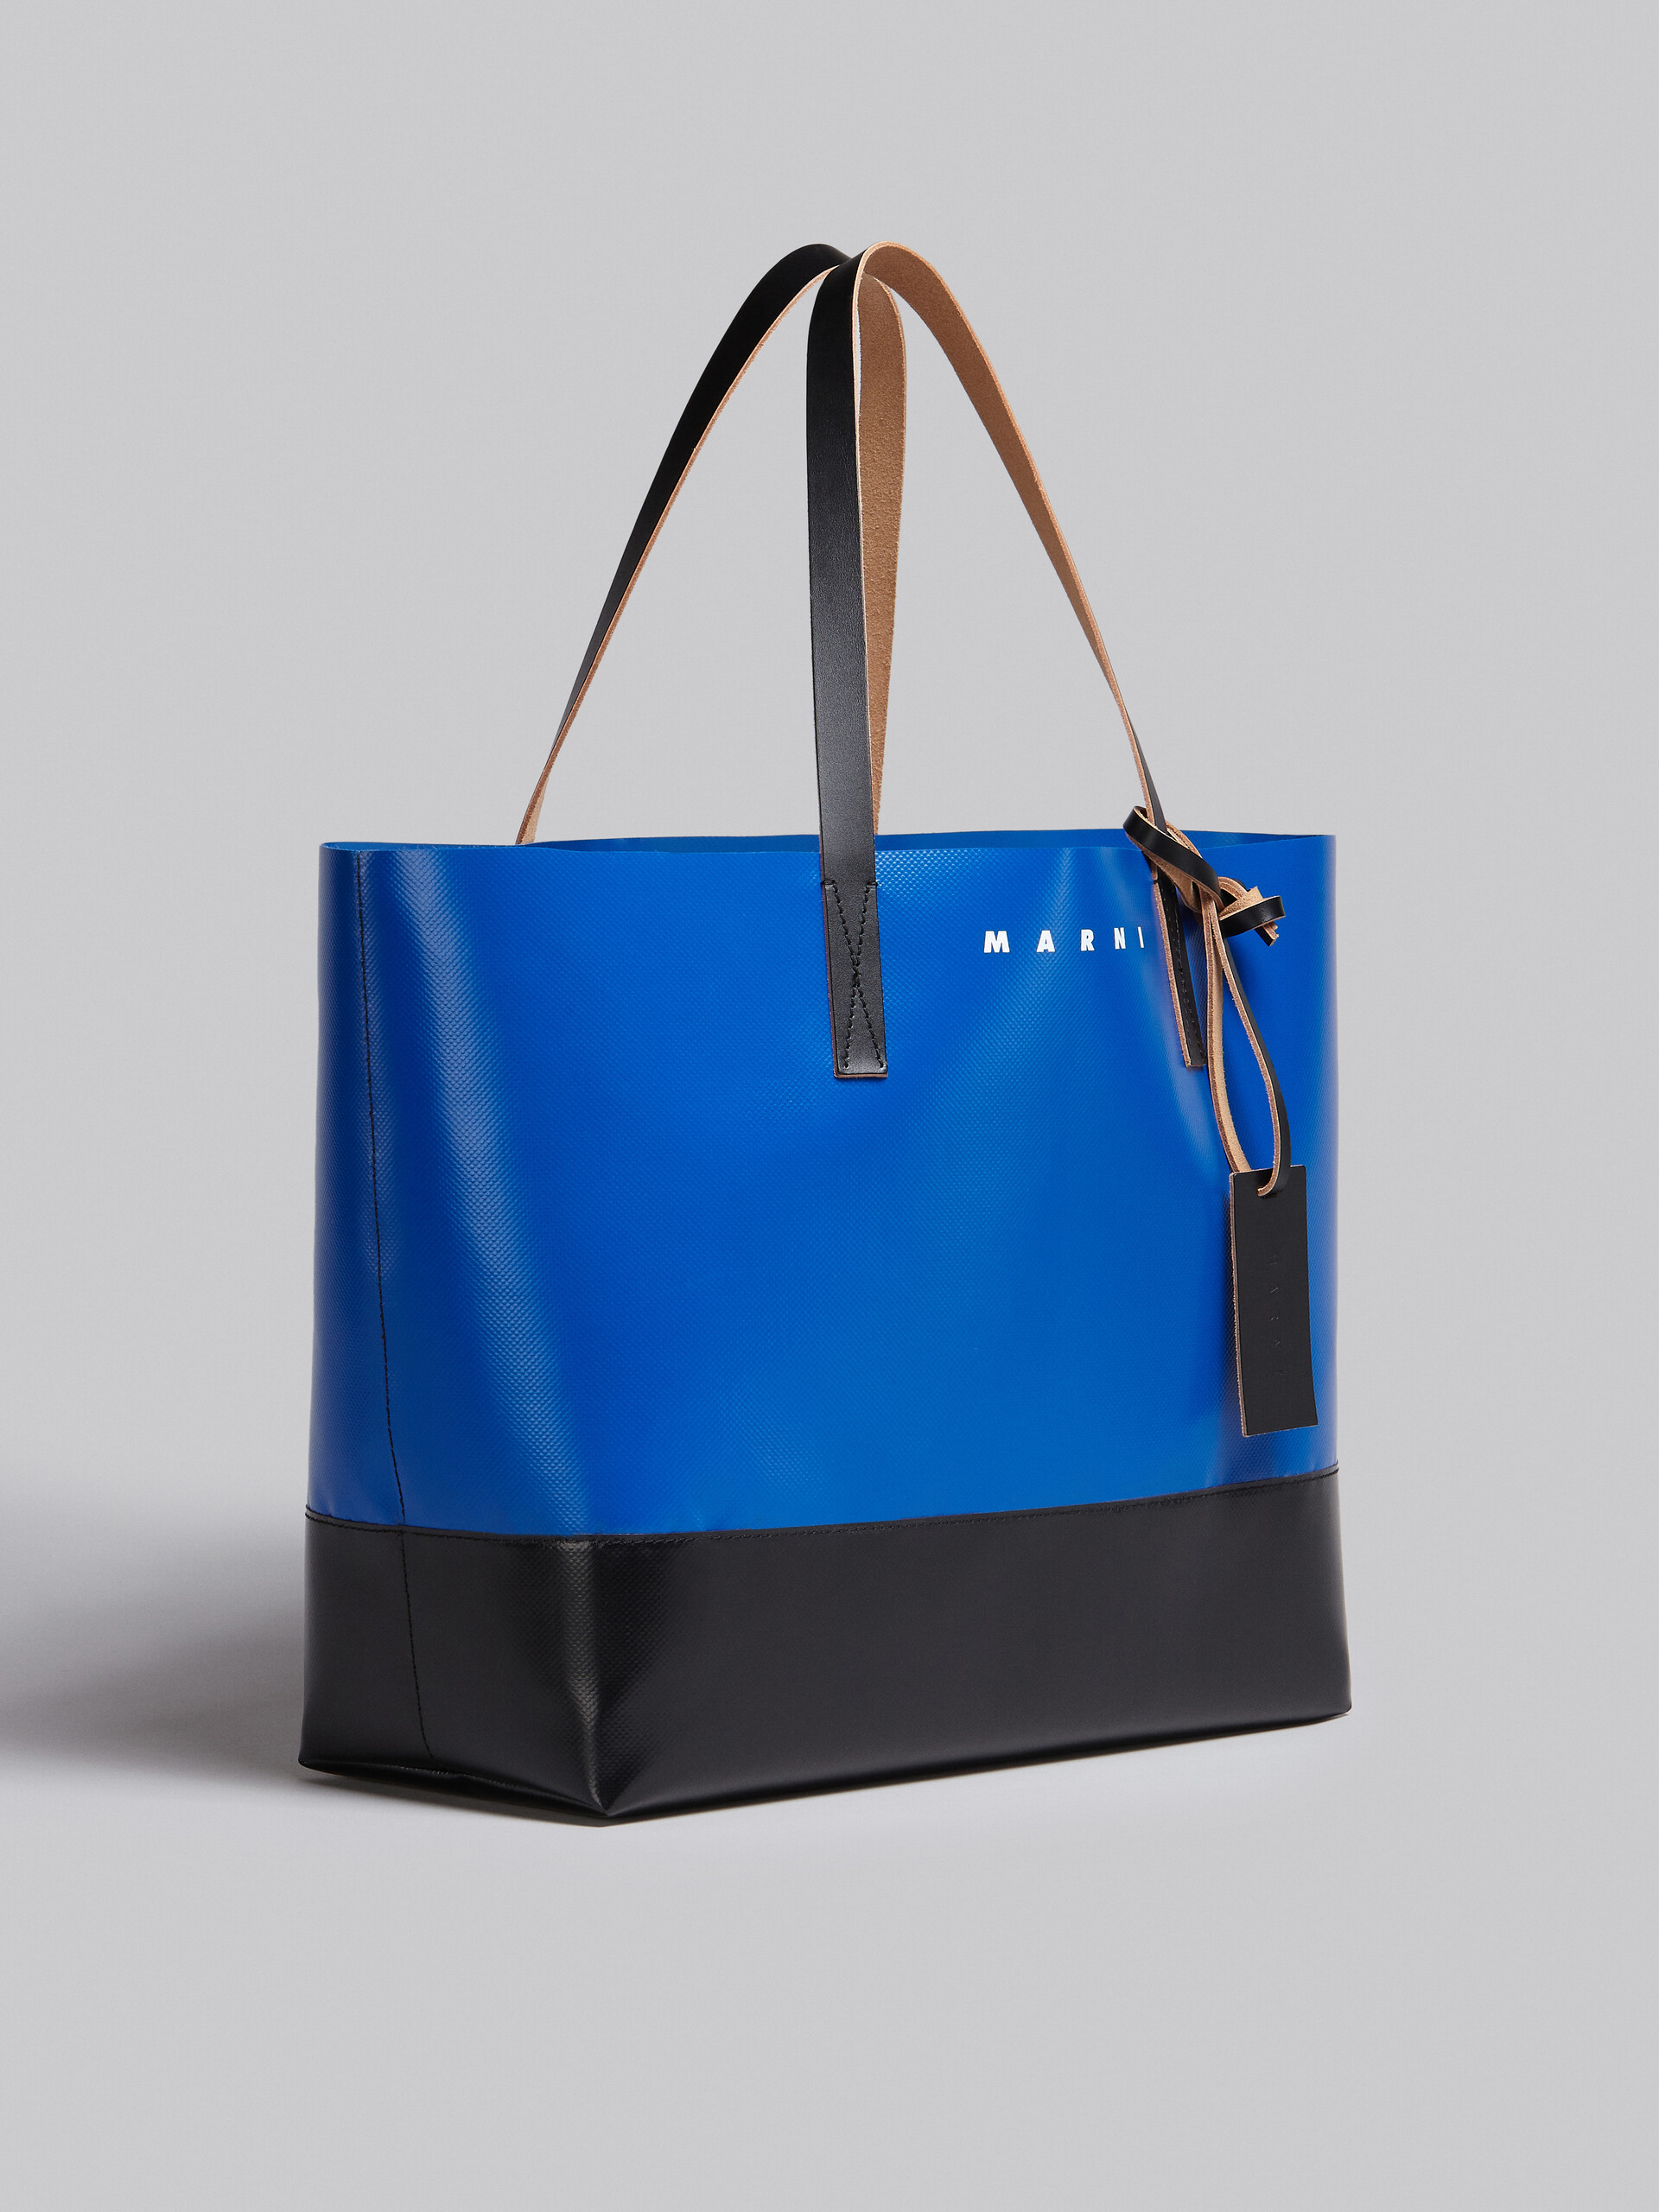 Tribeca shopping bag in blue and black - Shopping Bags - Image 6